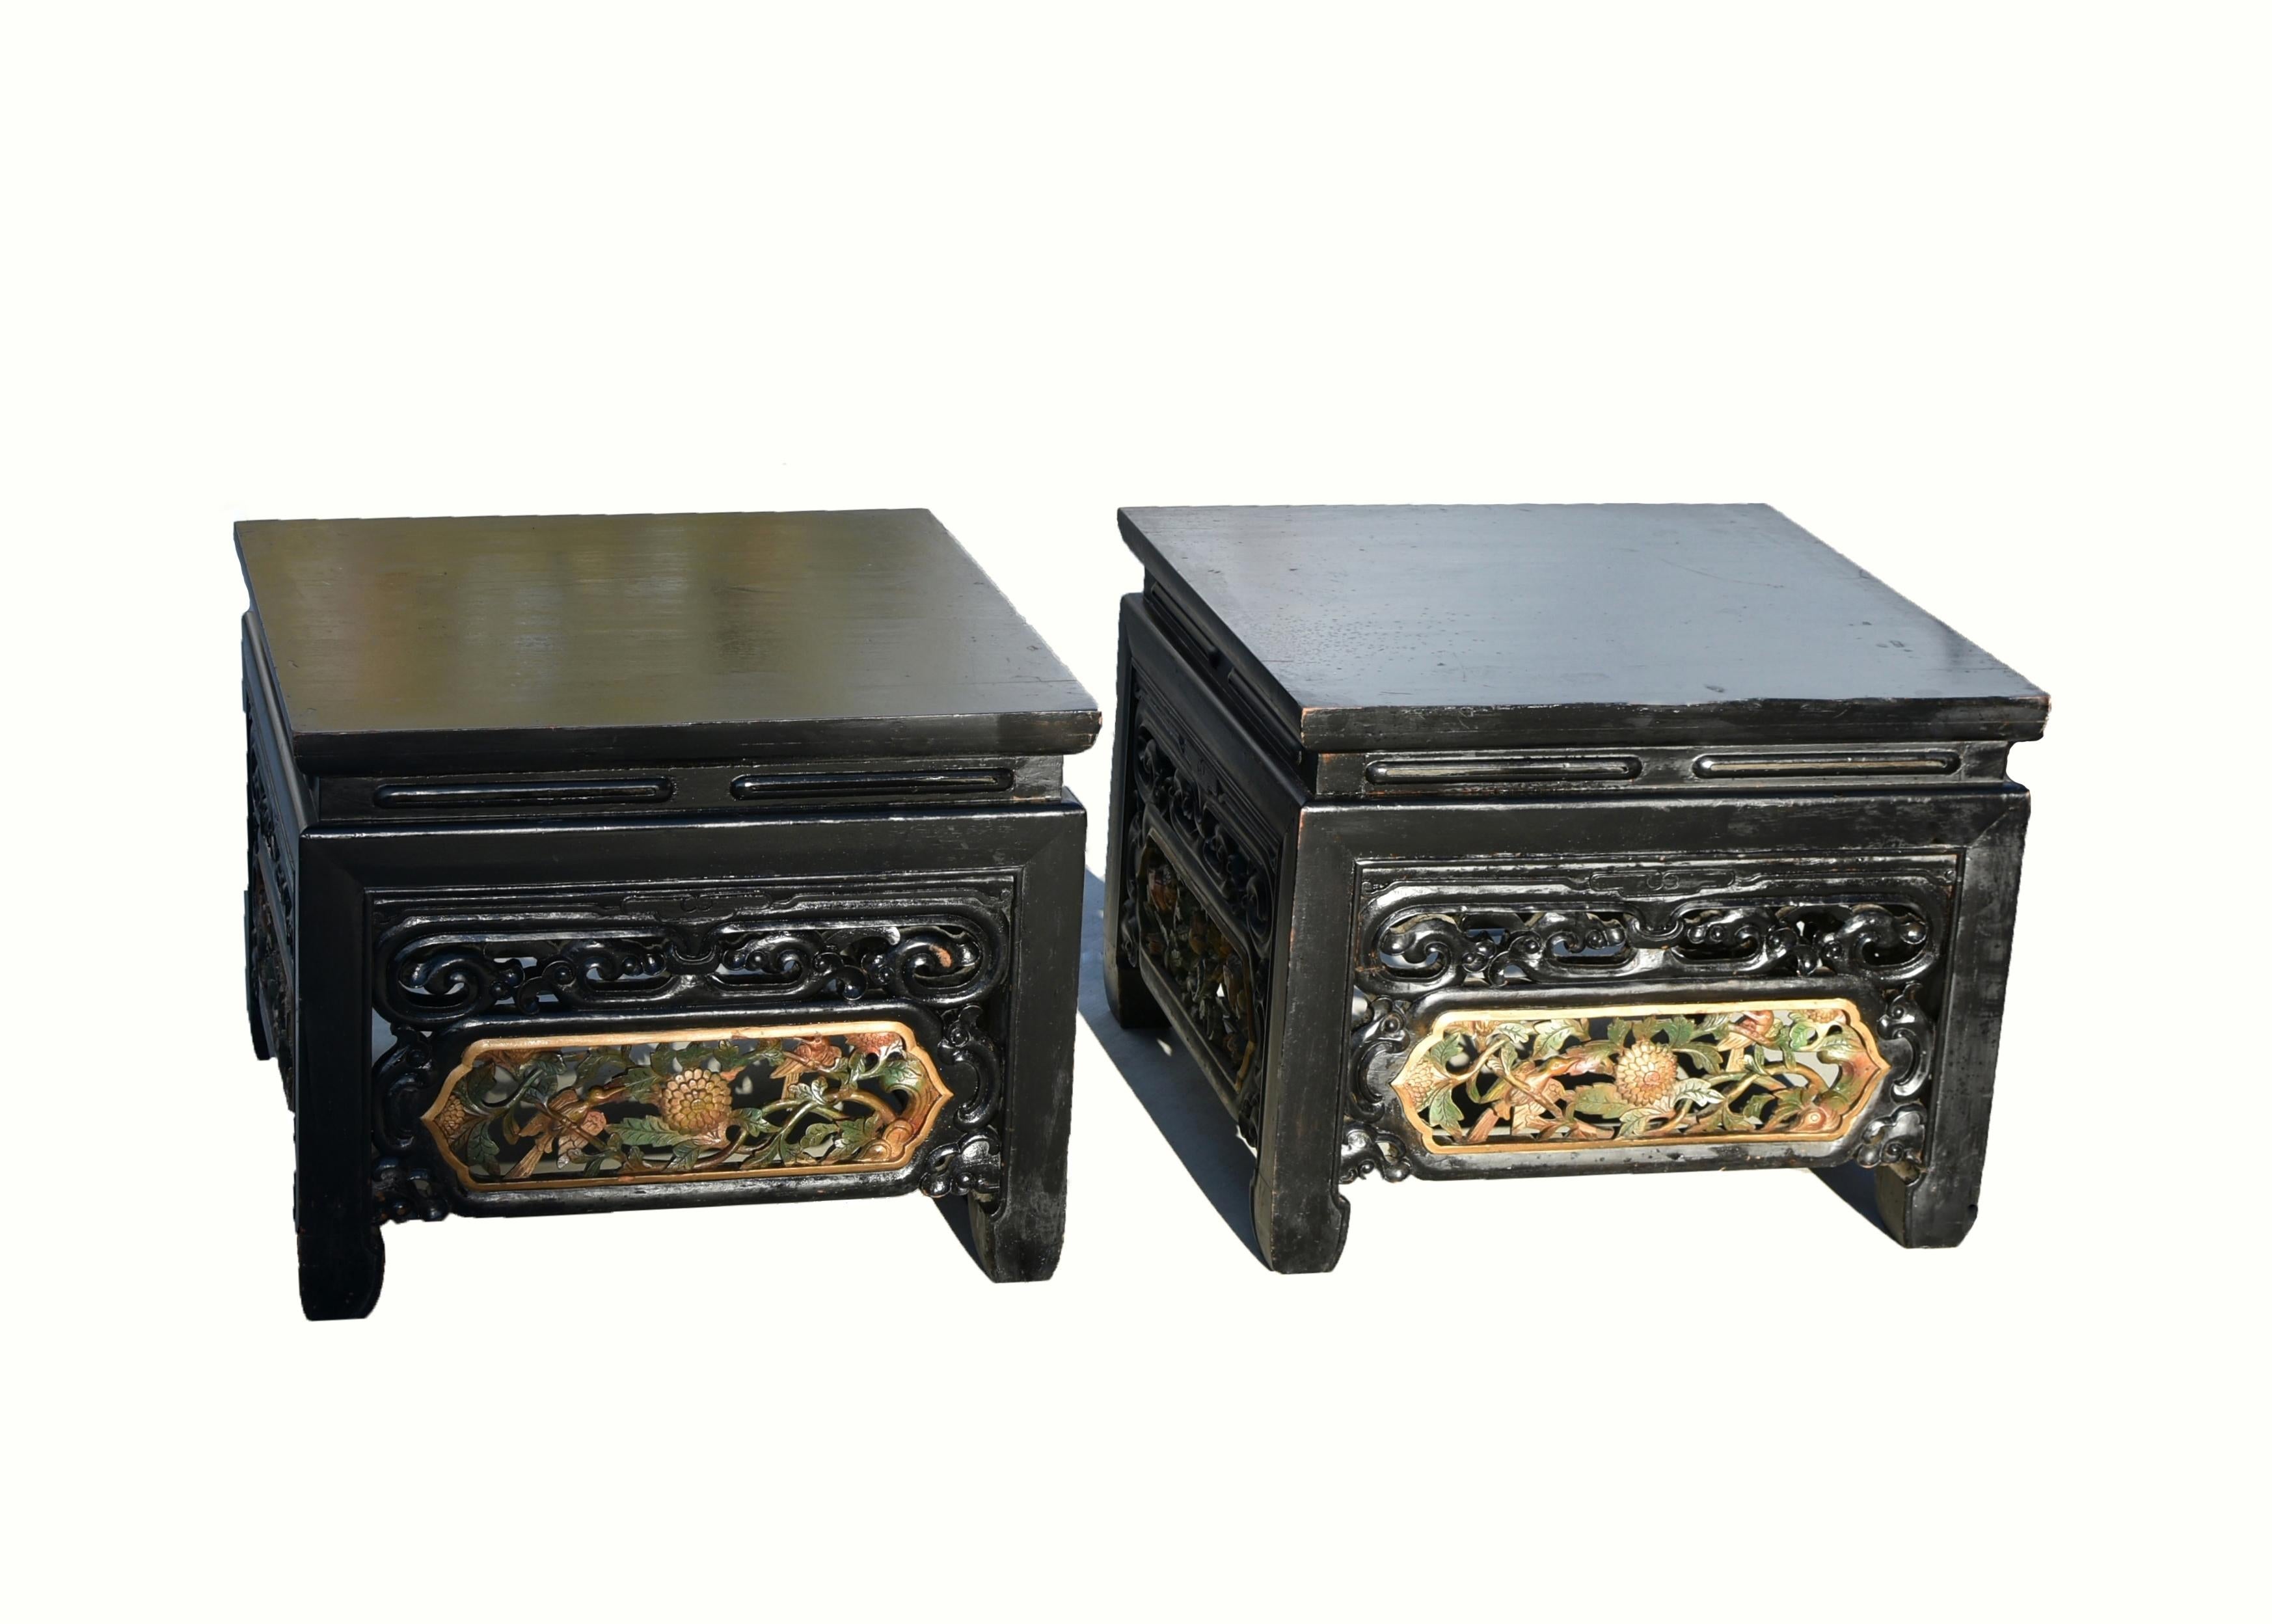 An exceptional offer of value on this pair of beautiful, fully carved solid wood low tables. Solid single board top connects to a narrow waist continuing on to straight legs with hoof feet. The waist is carved with thin slits of 